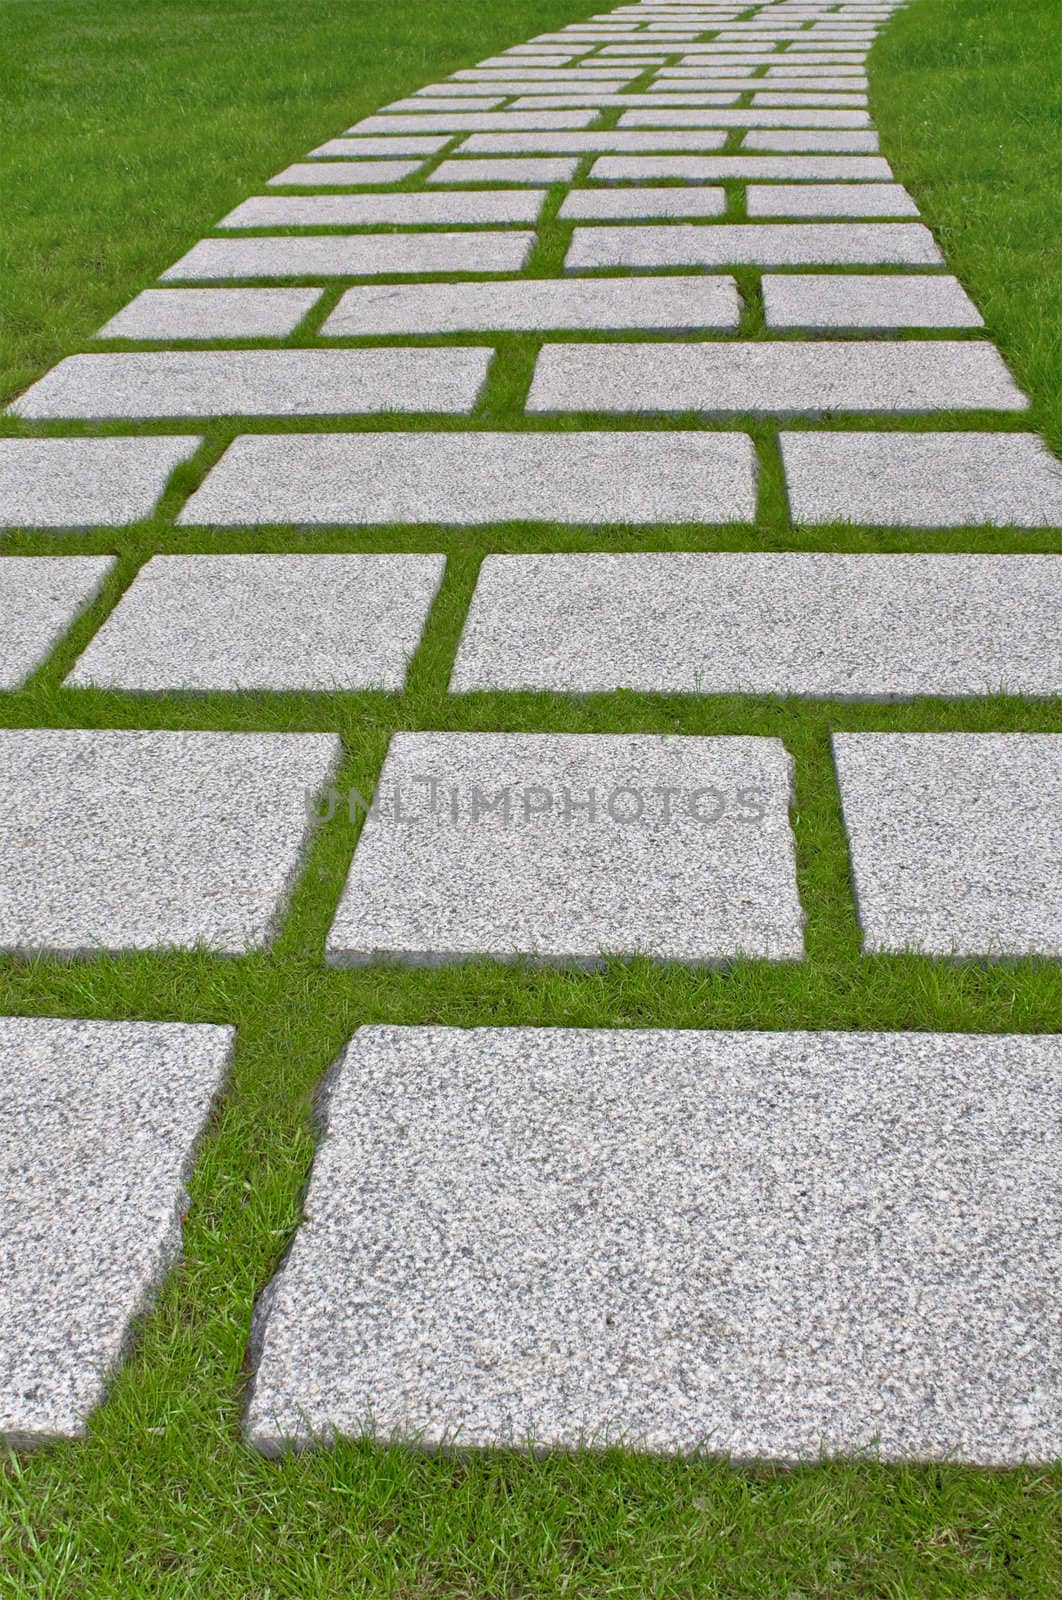 Granite path laid out on a green grass